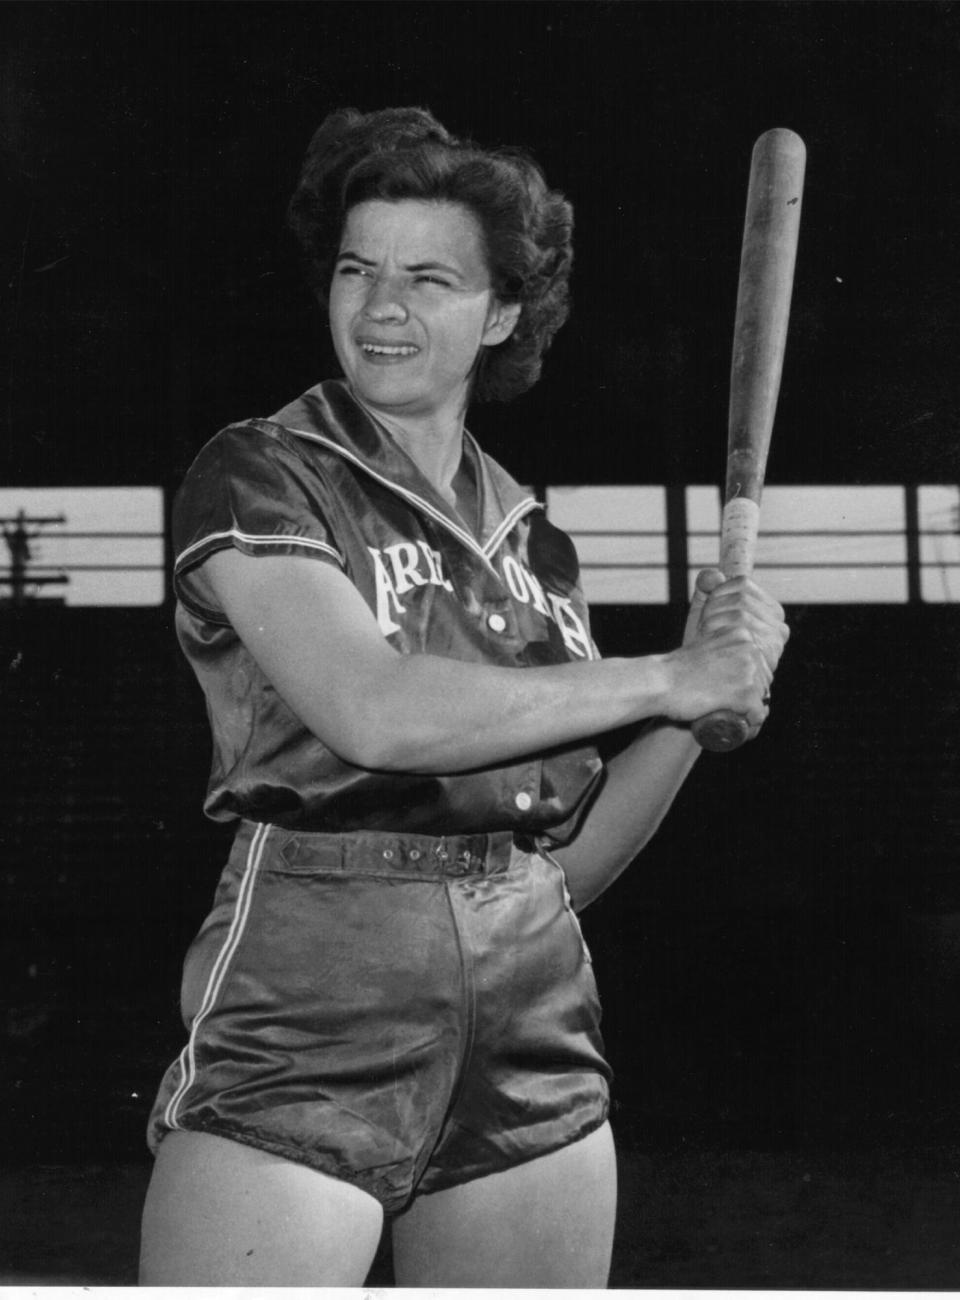 Dot Wilkinson was a star catcher and hitter for the Arizona Ramblers.